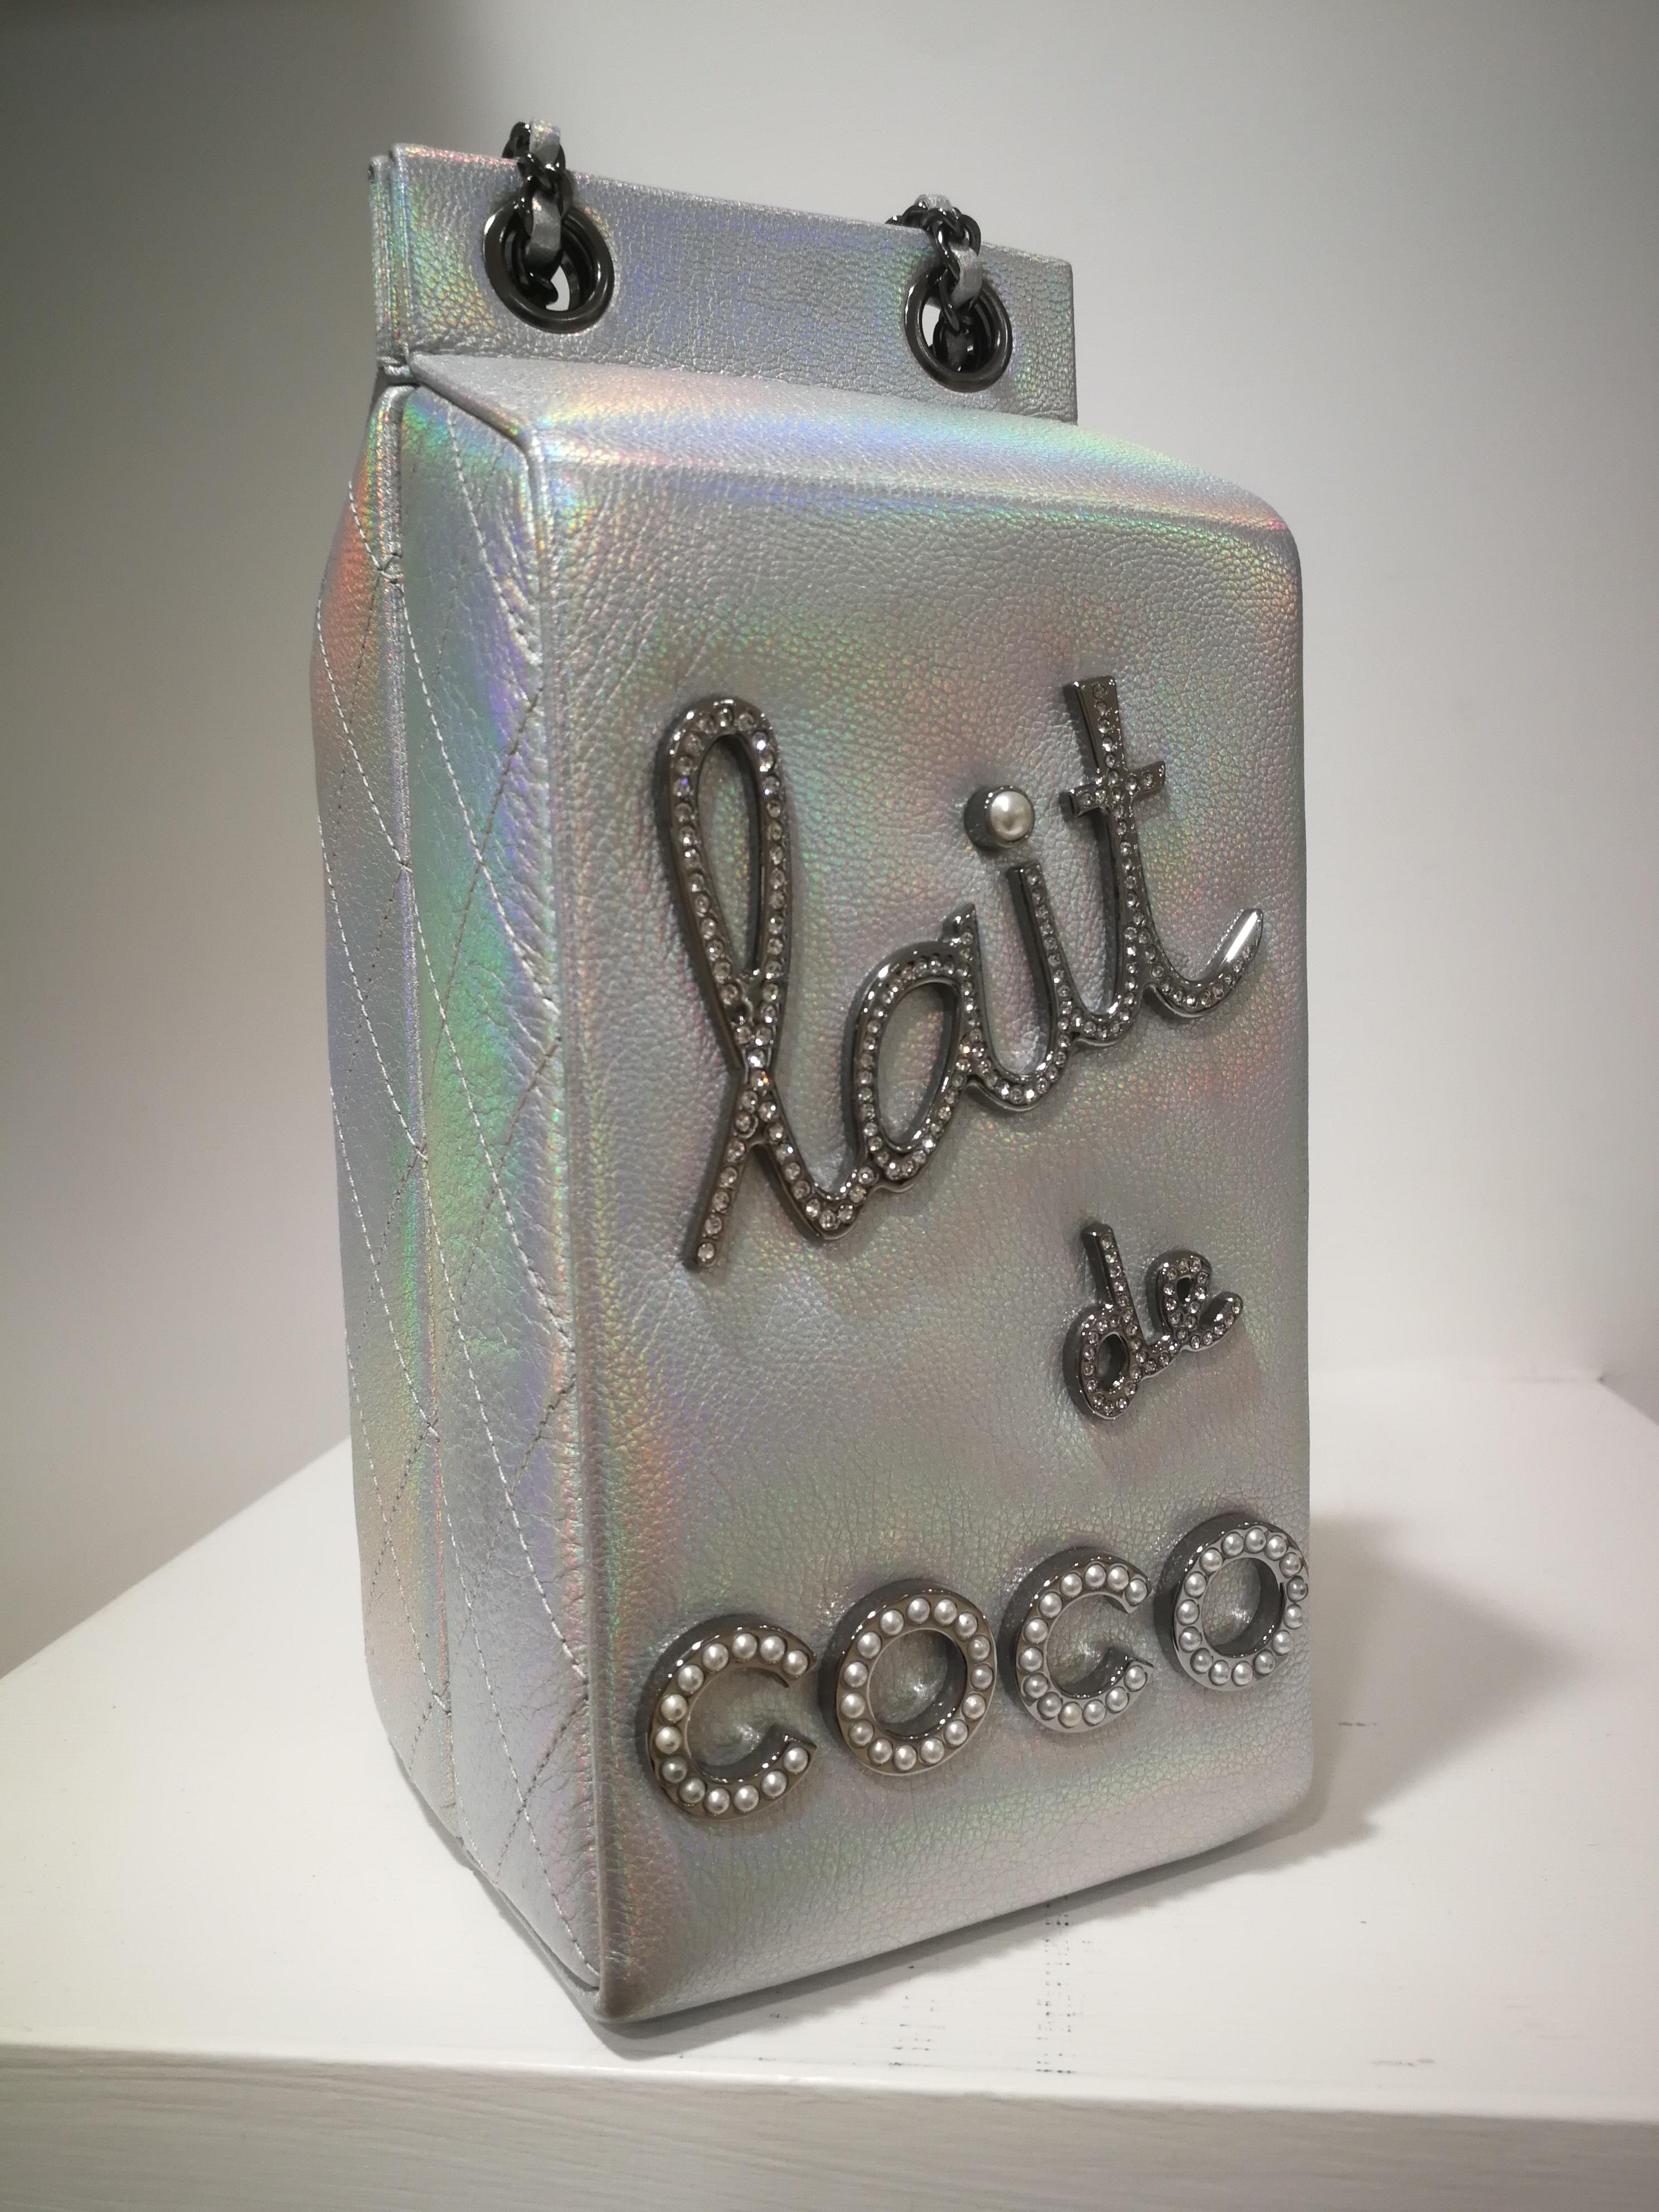 Chanel has become renowned for their extravagant runway shows, taking their seasonal themes to jaw-dropping levels. This vintage 'Lait de Coco' shoulder bag is from the label's grocery store inspired Fall/Winter 2014 collection which presented some